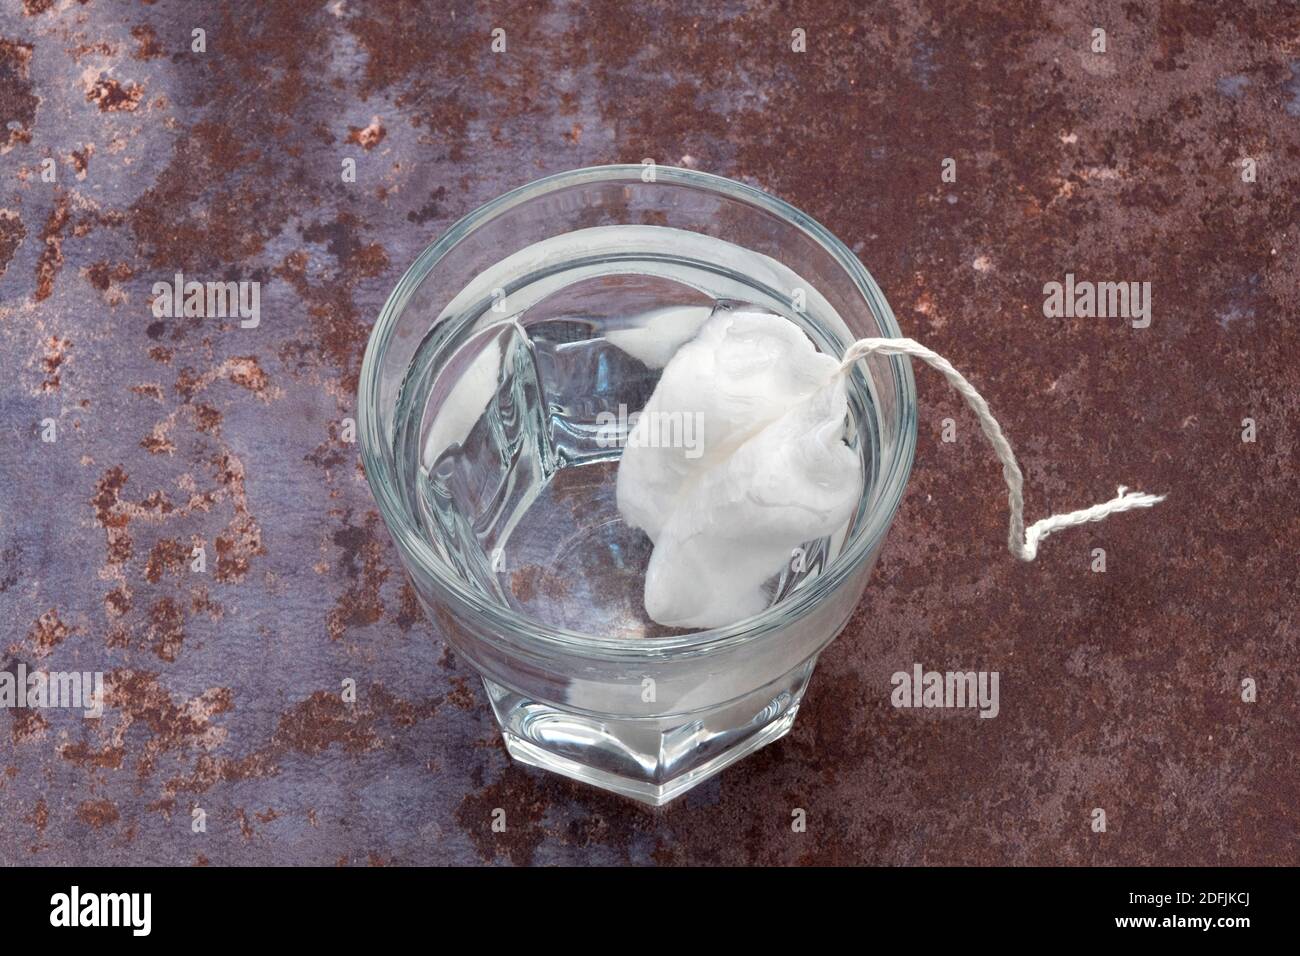 A new tampon immersed in a glass of water to demonstrate its effectiveness  Stock Photo - Alamy